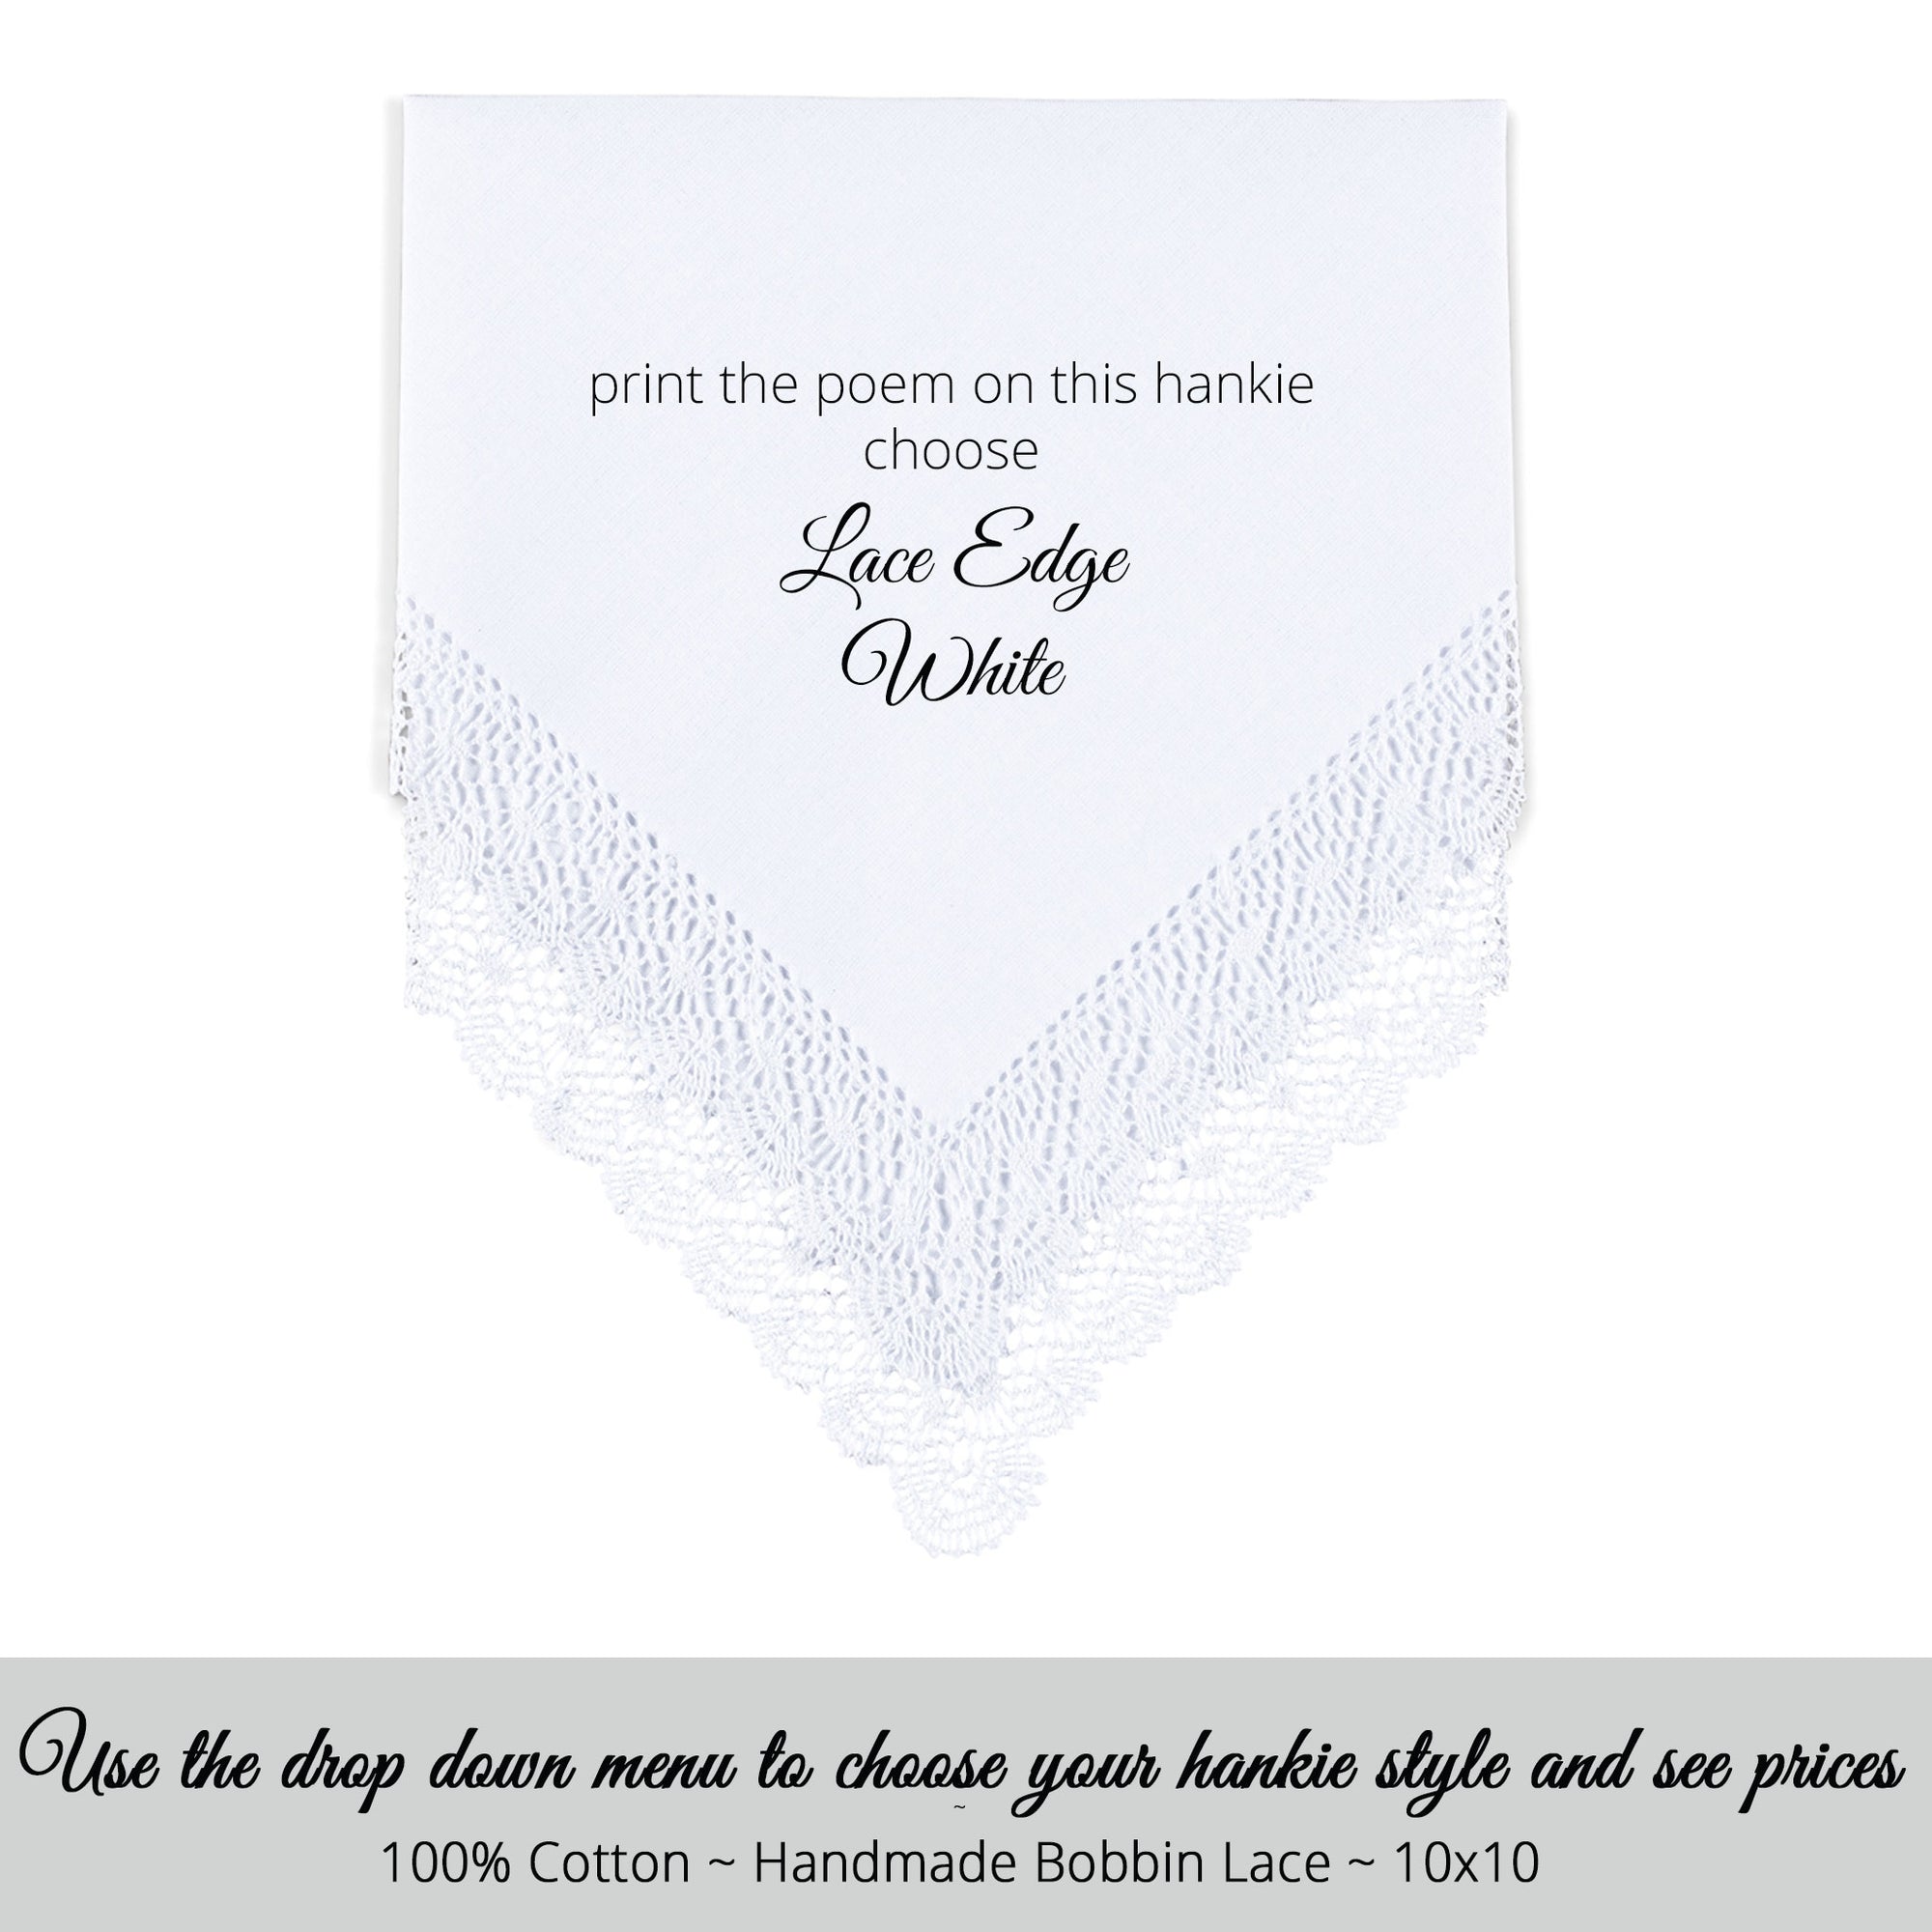 Wedding Handkerchief white with bobbin lace poem printed hankie for the daughter of the bride